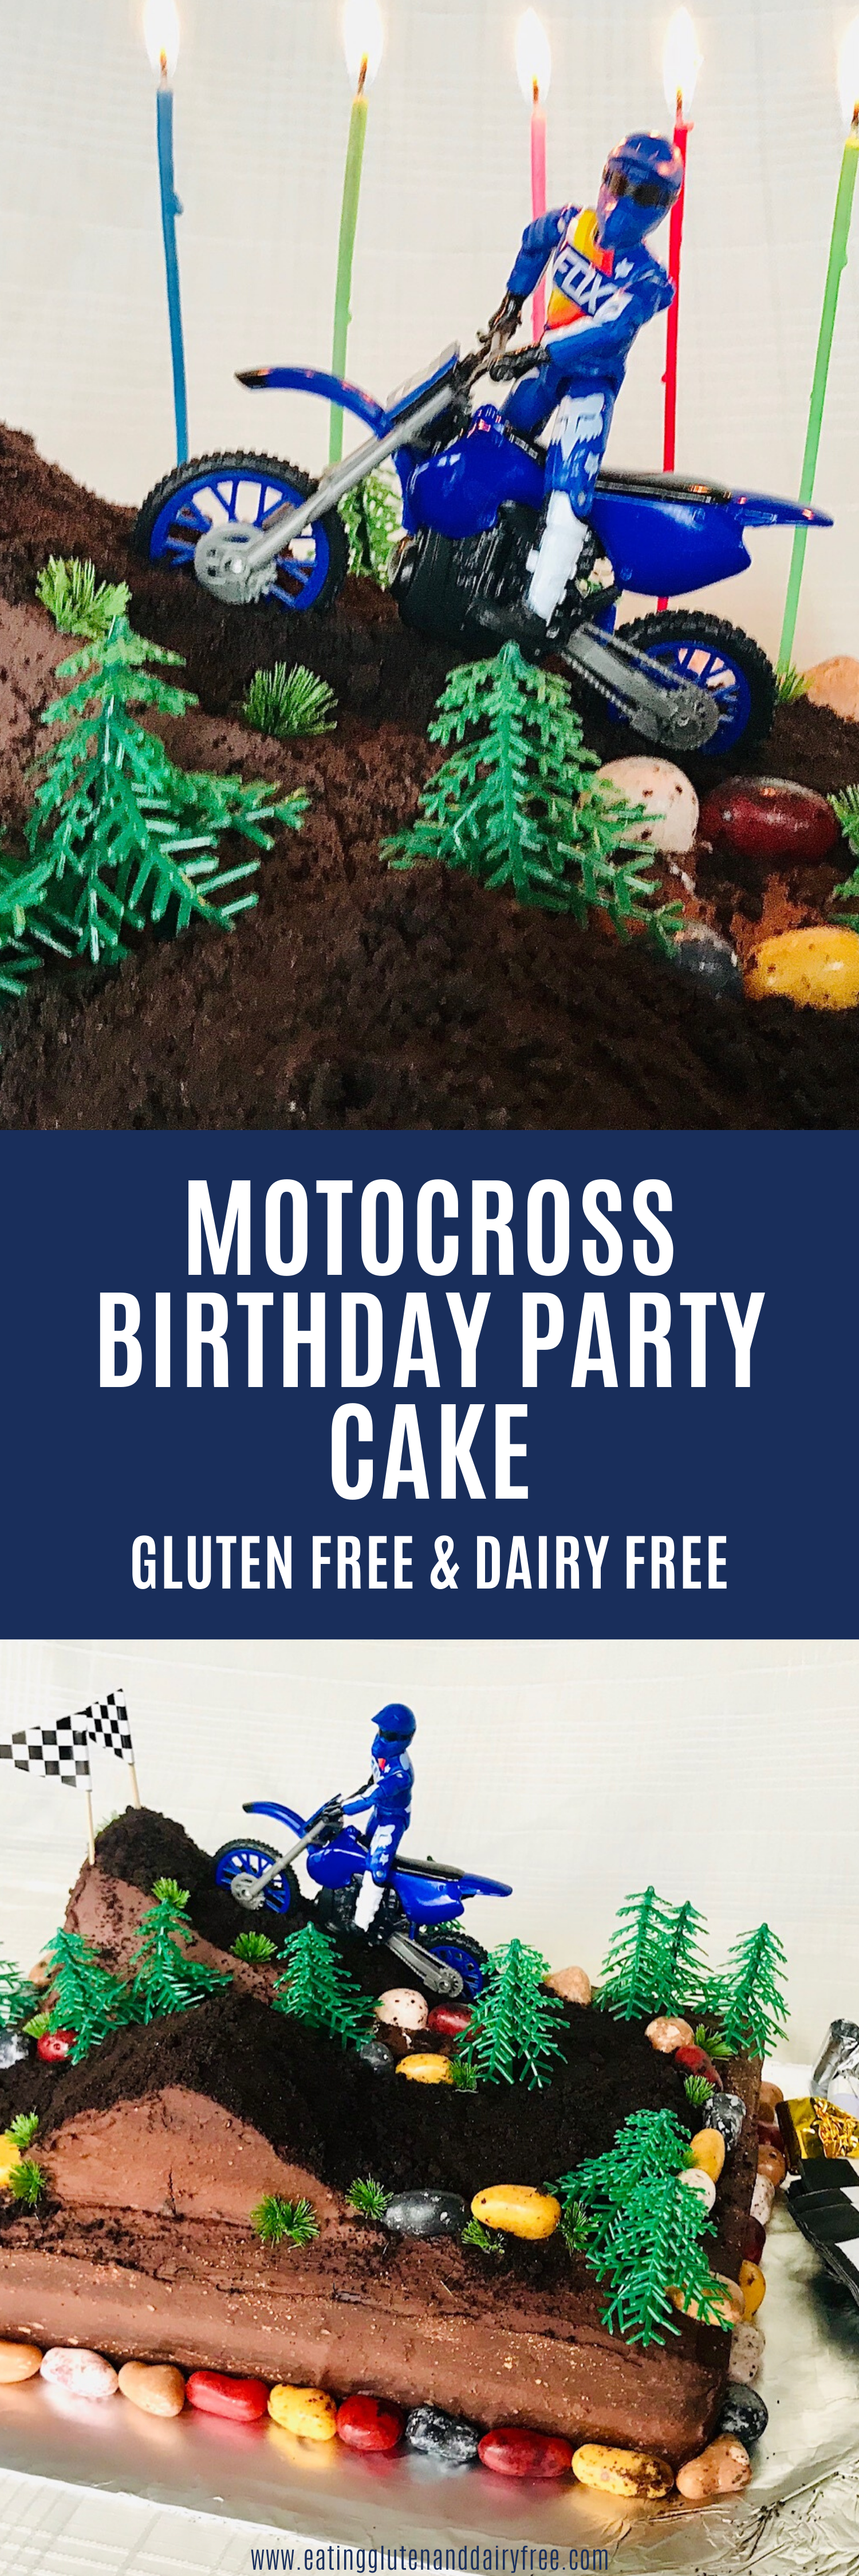 A collage of dirt bike cake images with text overlay.